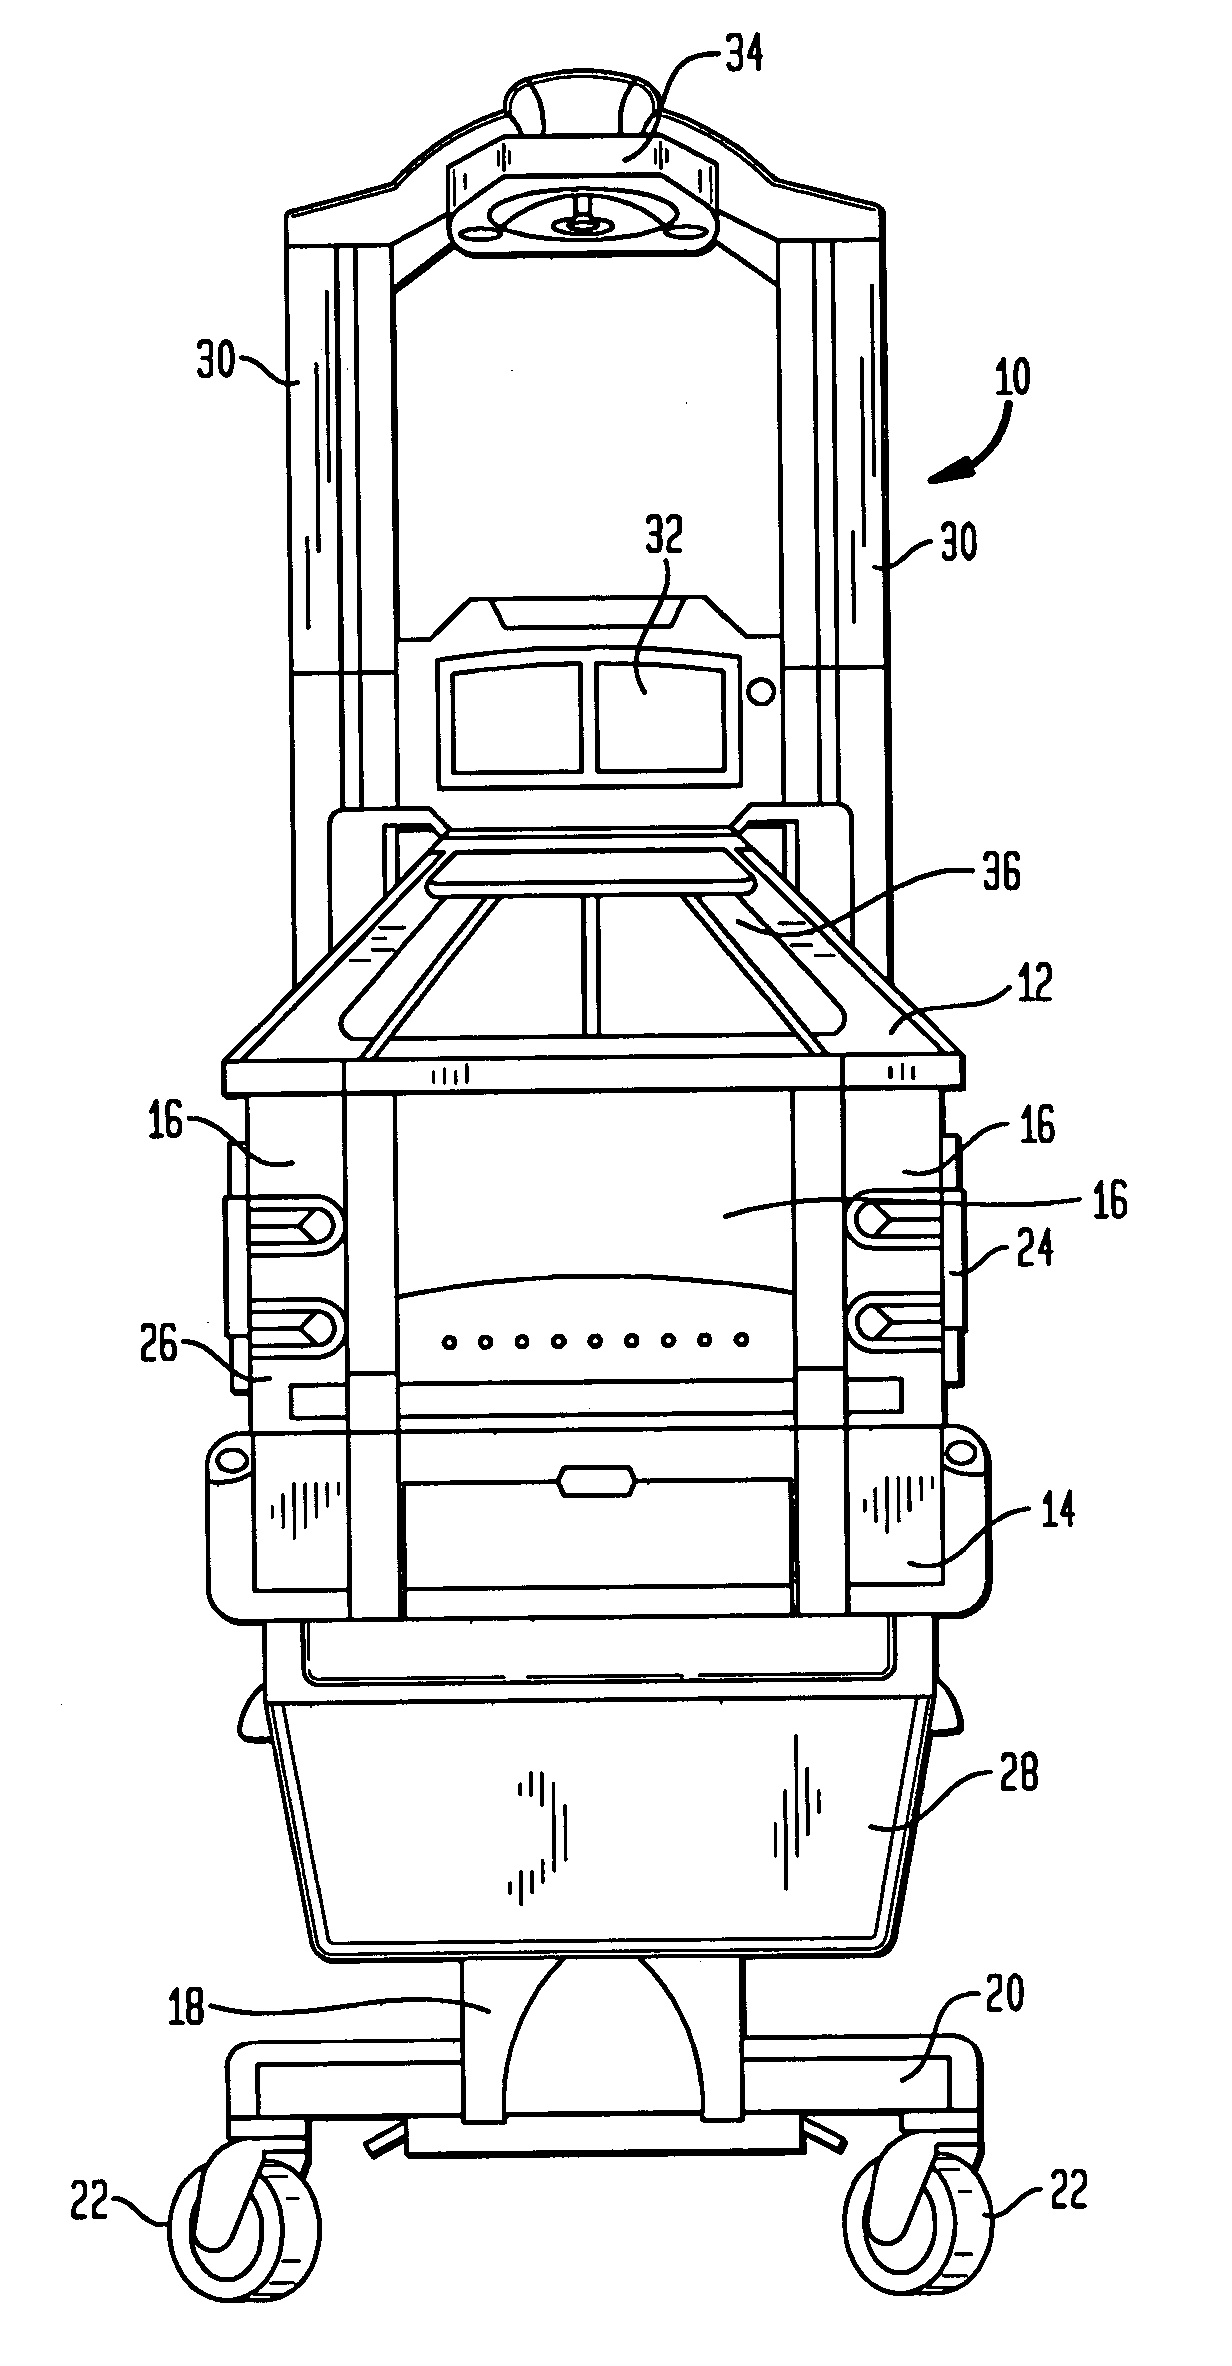 Infant care apparatus with fixed overhead heater